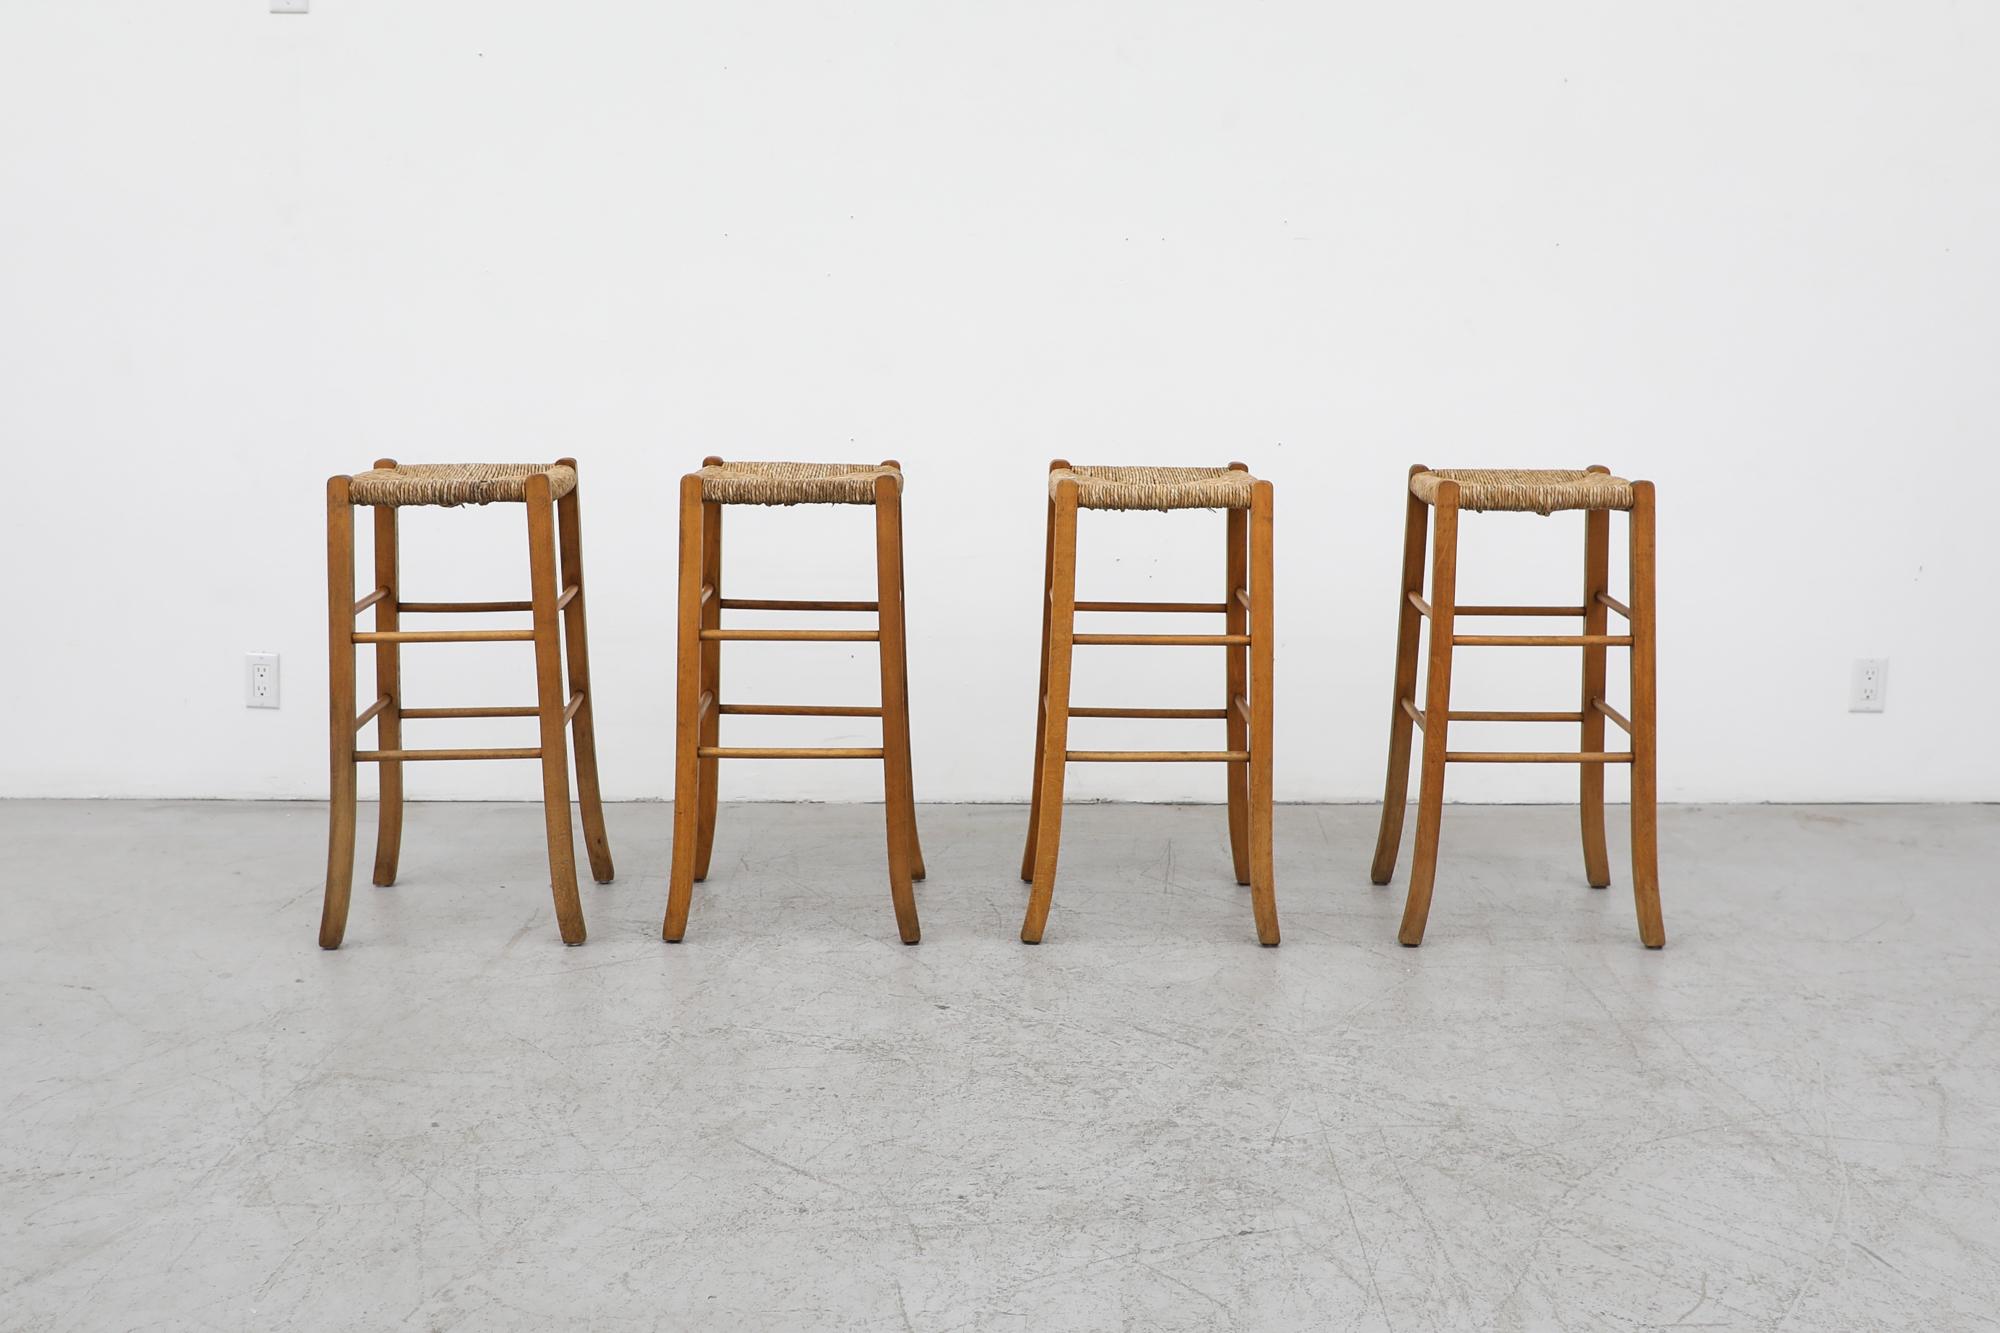 Set of 4 Charlotte Perriand style oak bar stools with beautifully woven rush seats and slightly angled legs. Seat height is 30